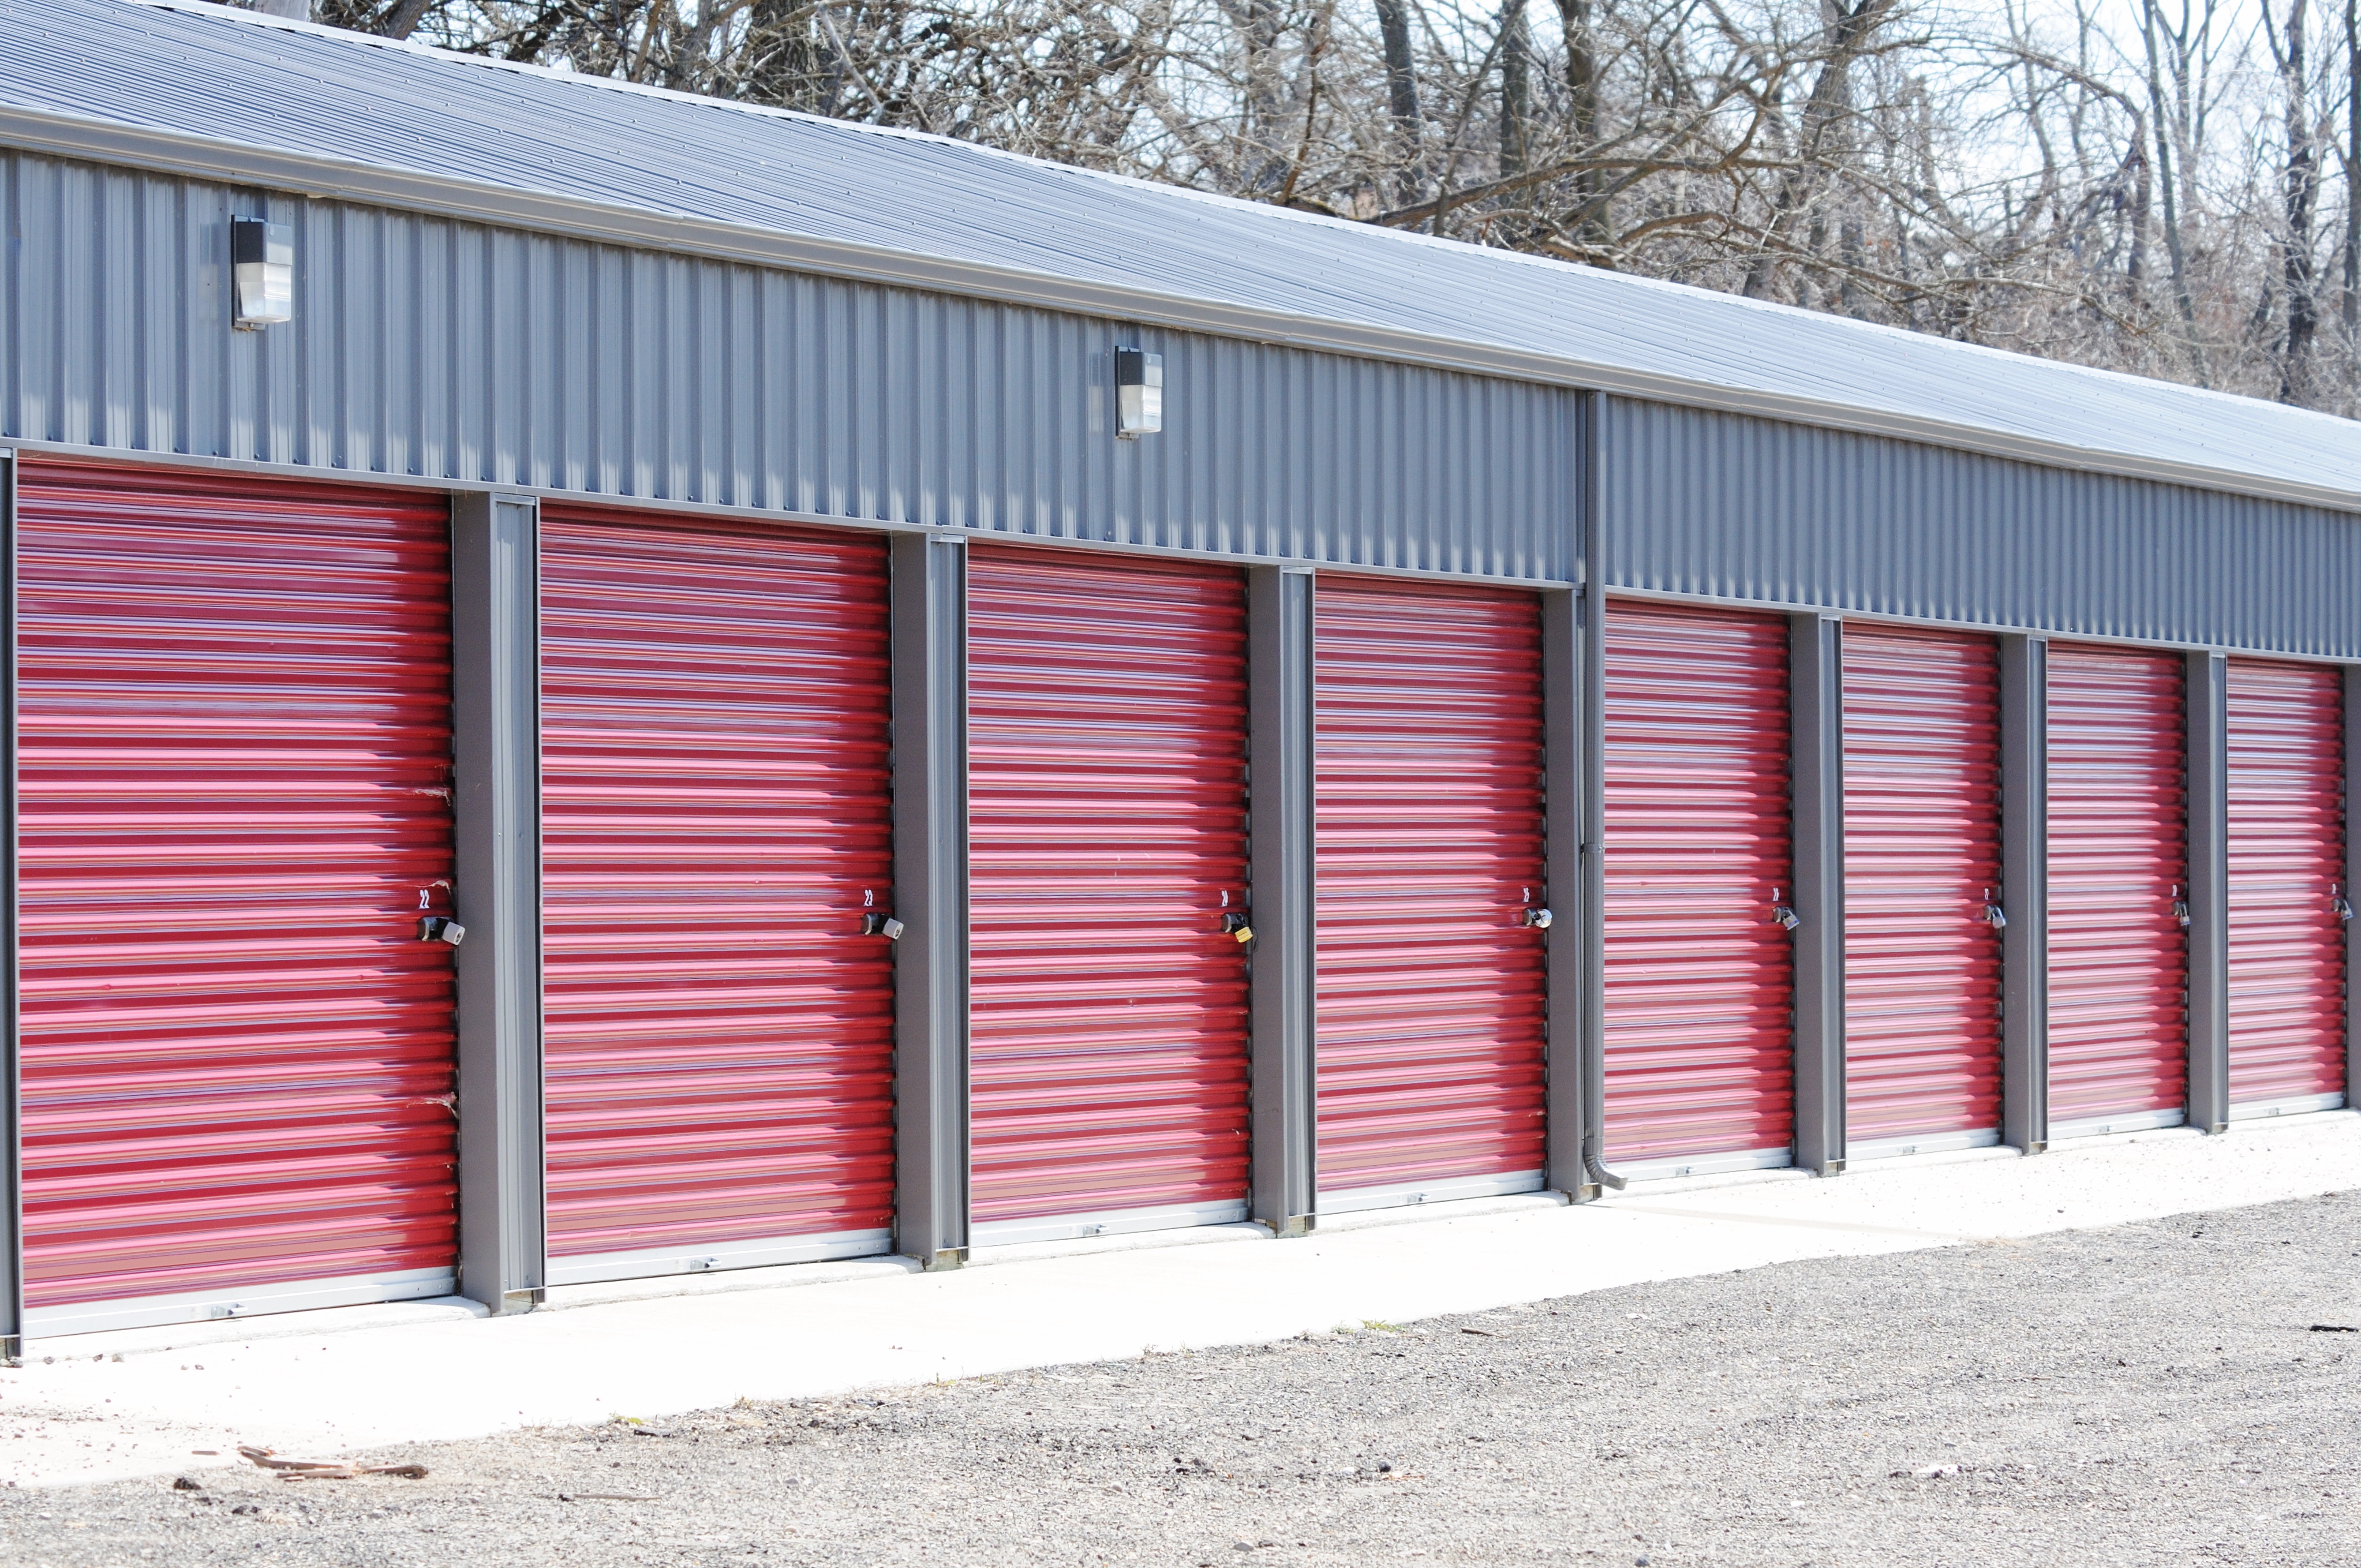 Enjoy Affordable Public Storage in Dallas, TX, By Going to a Dedicated Business